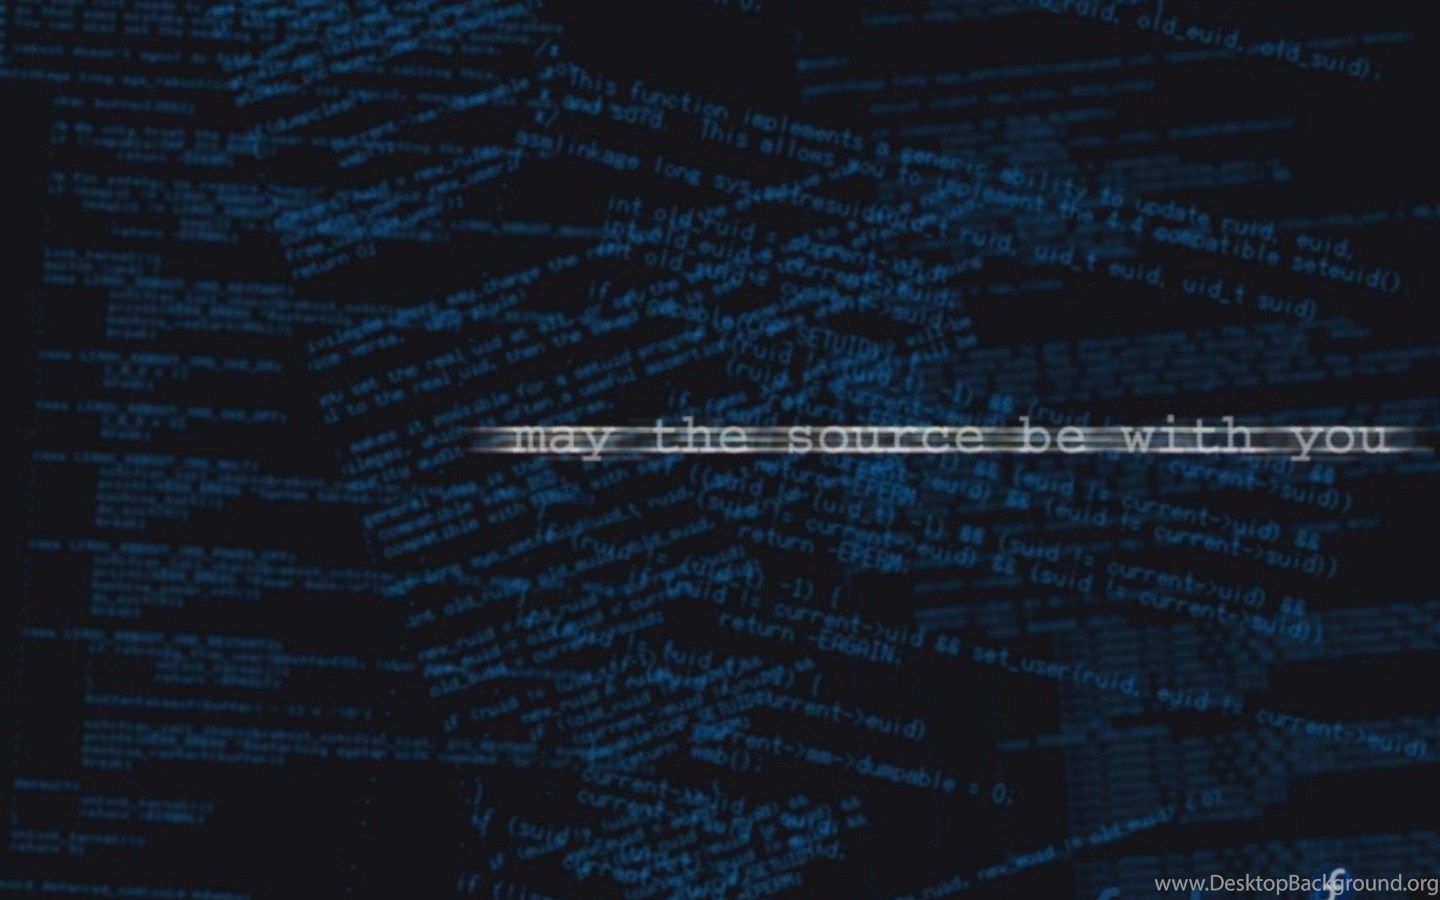 Fedora Open Source Wallpaper May The Source Be With You. Desktop Background